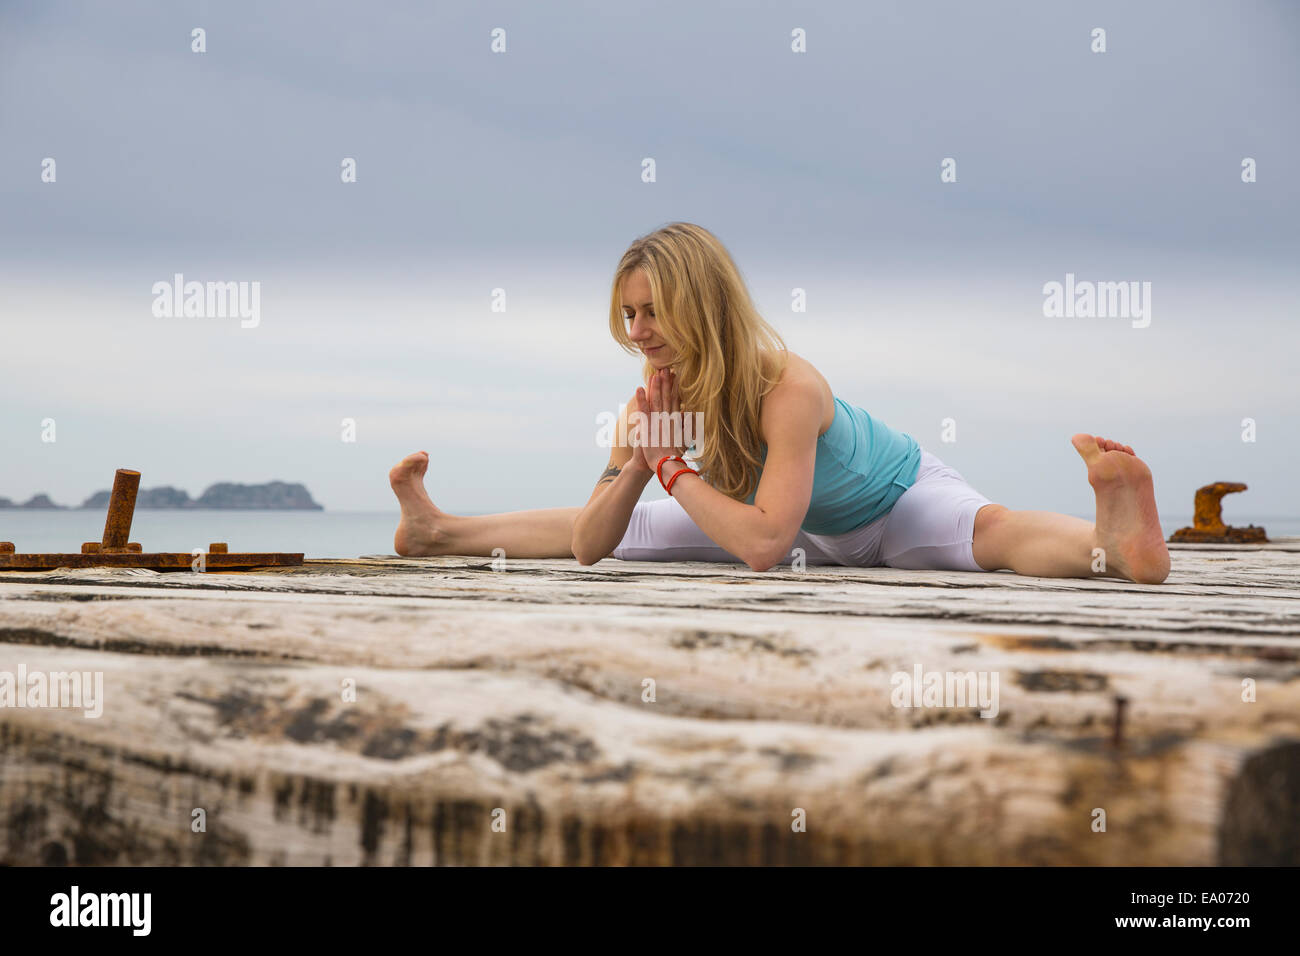 Mid adult woman with hands together practicing yoga on wooden pier mer Banque D'Images